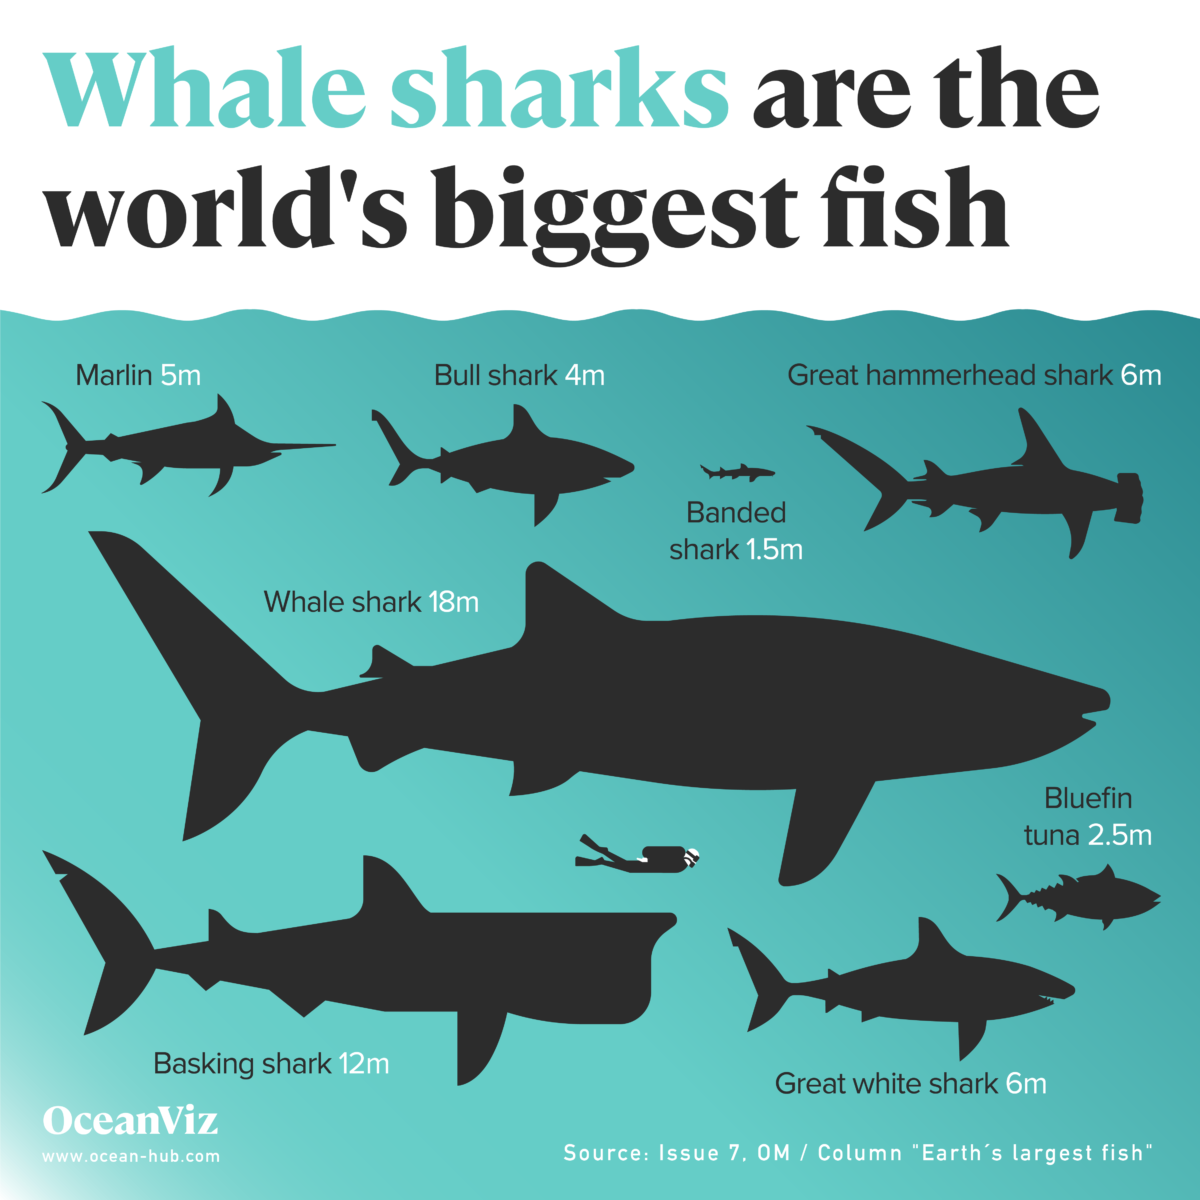 Whale sharks are the world´s biggest fish